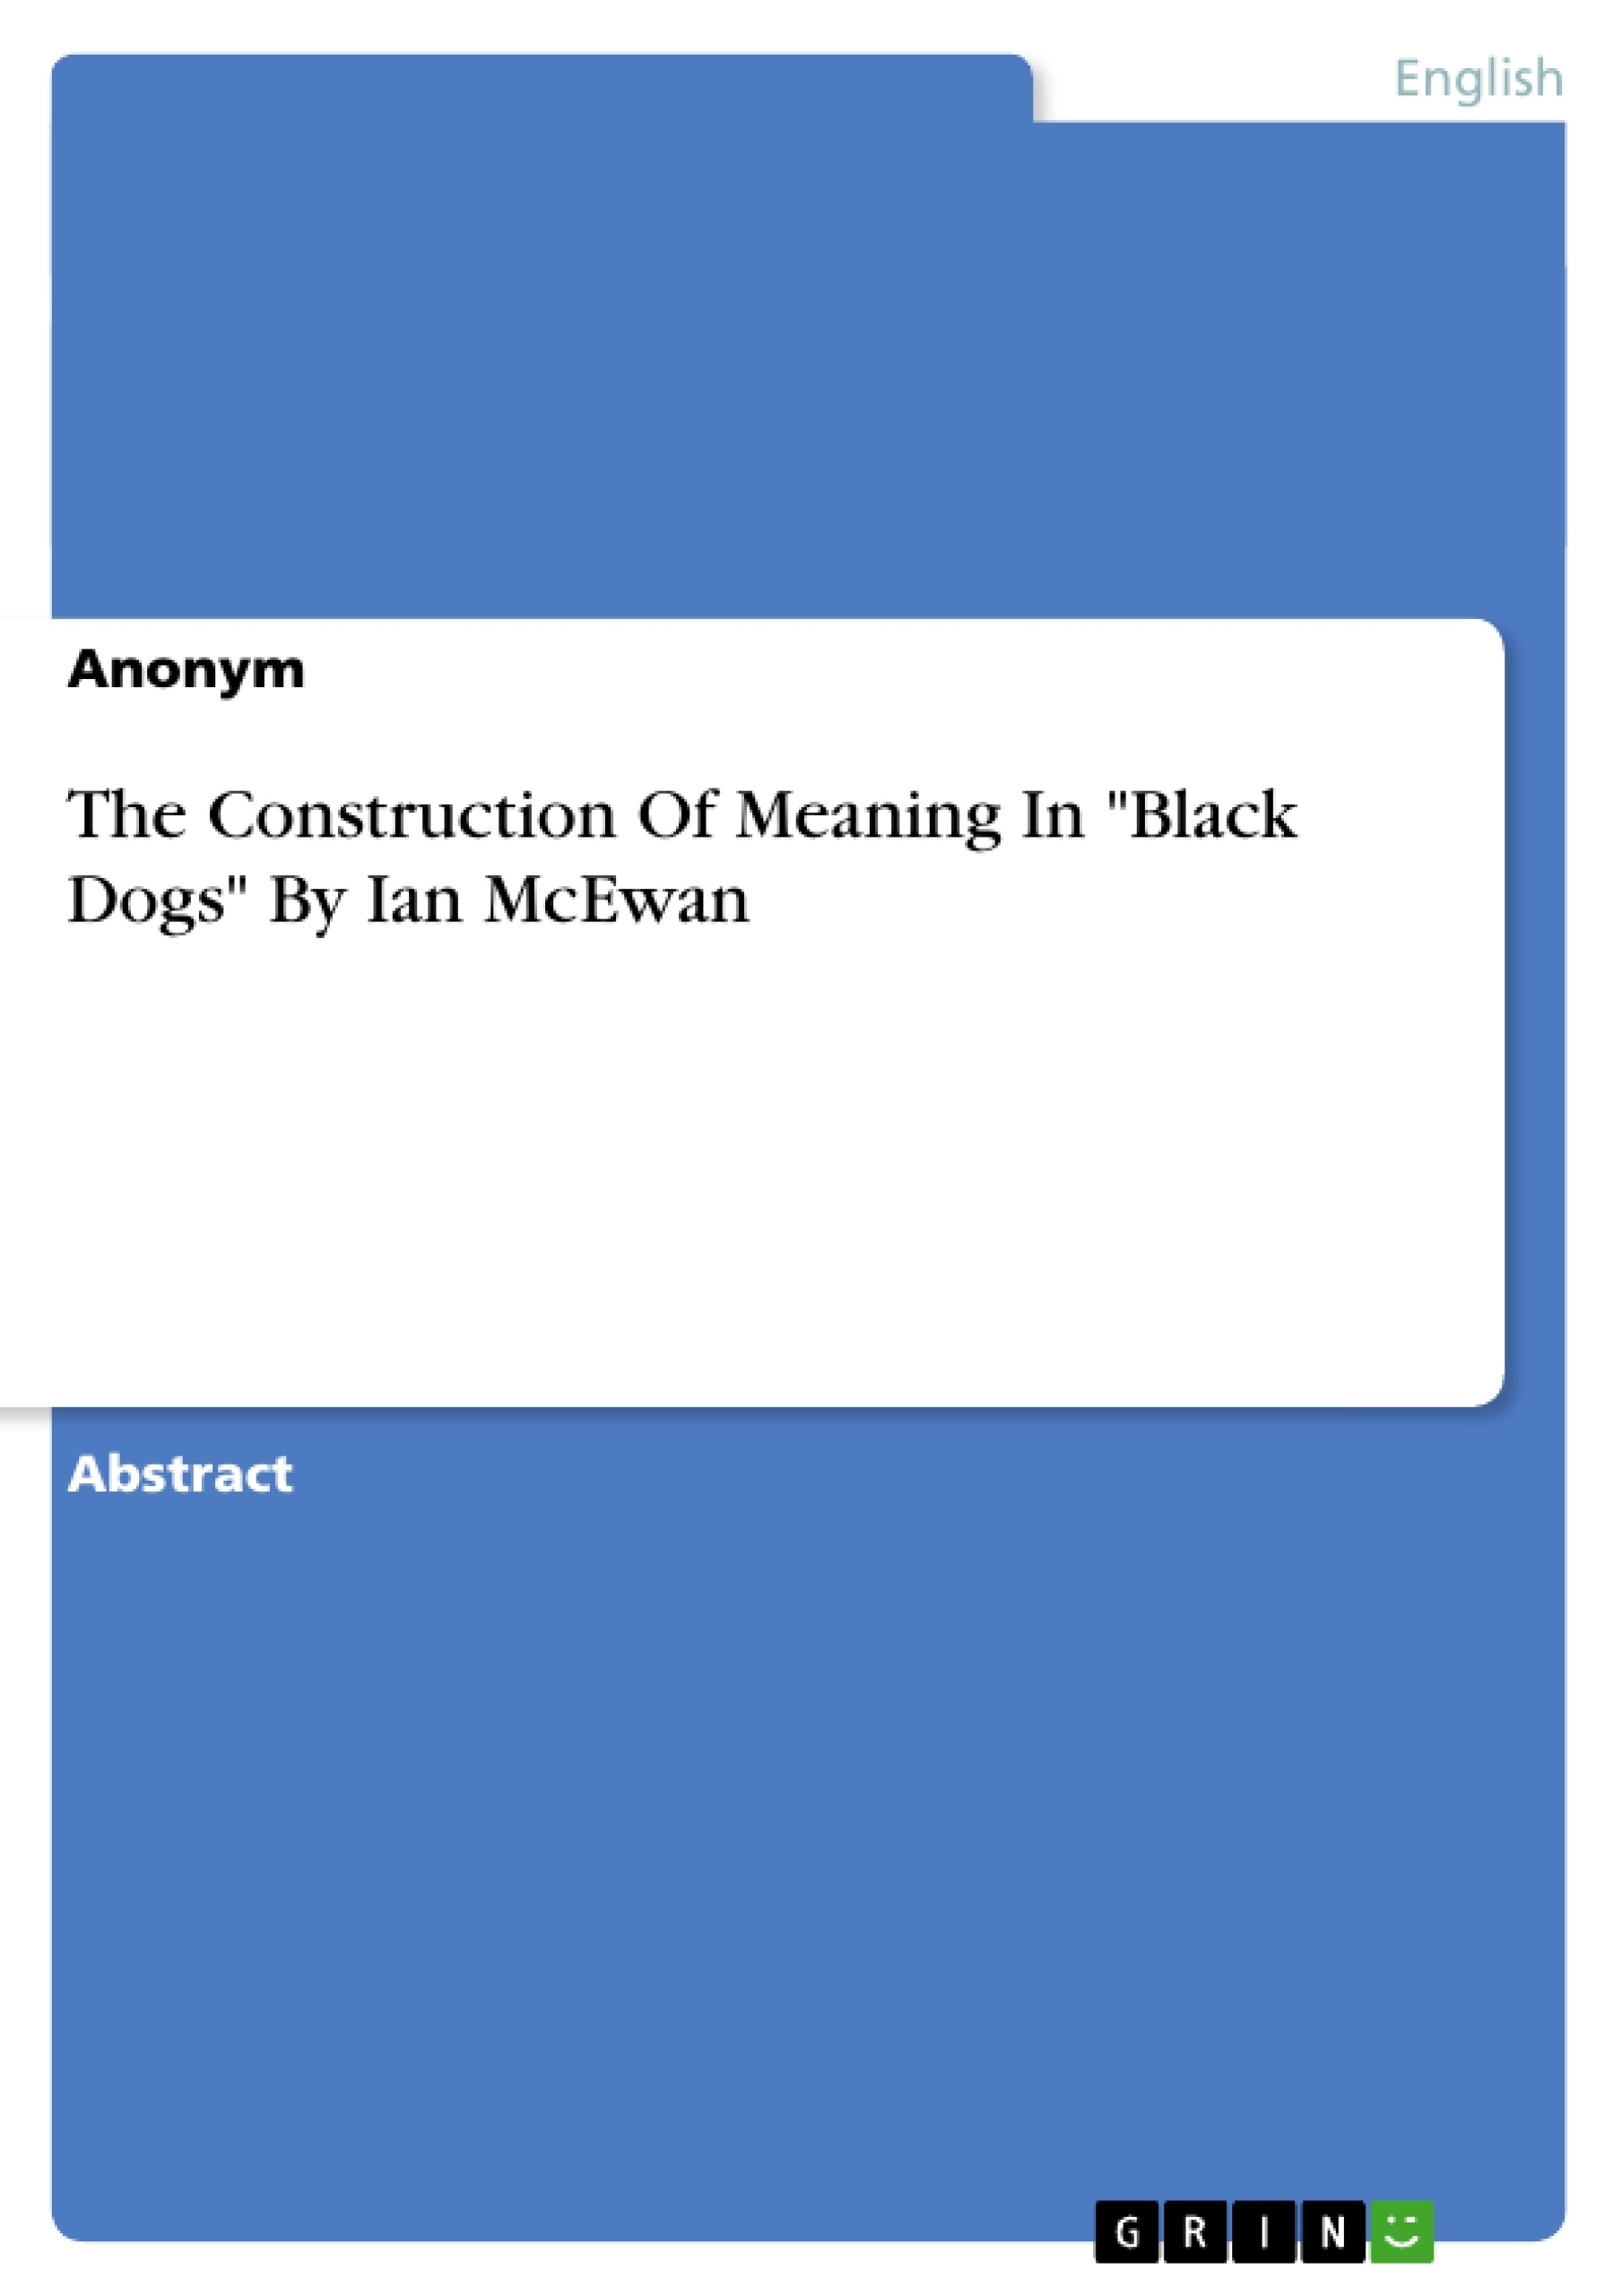 Titre: The Construction Of Meaning In "Black Dogs" By
Ian McEwan